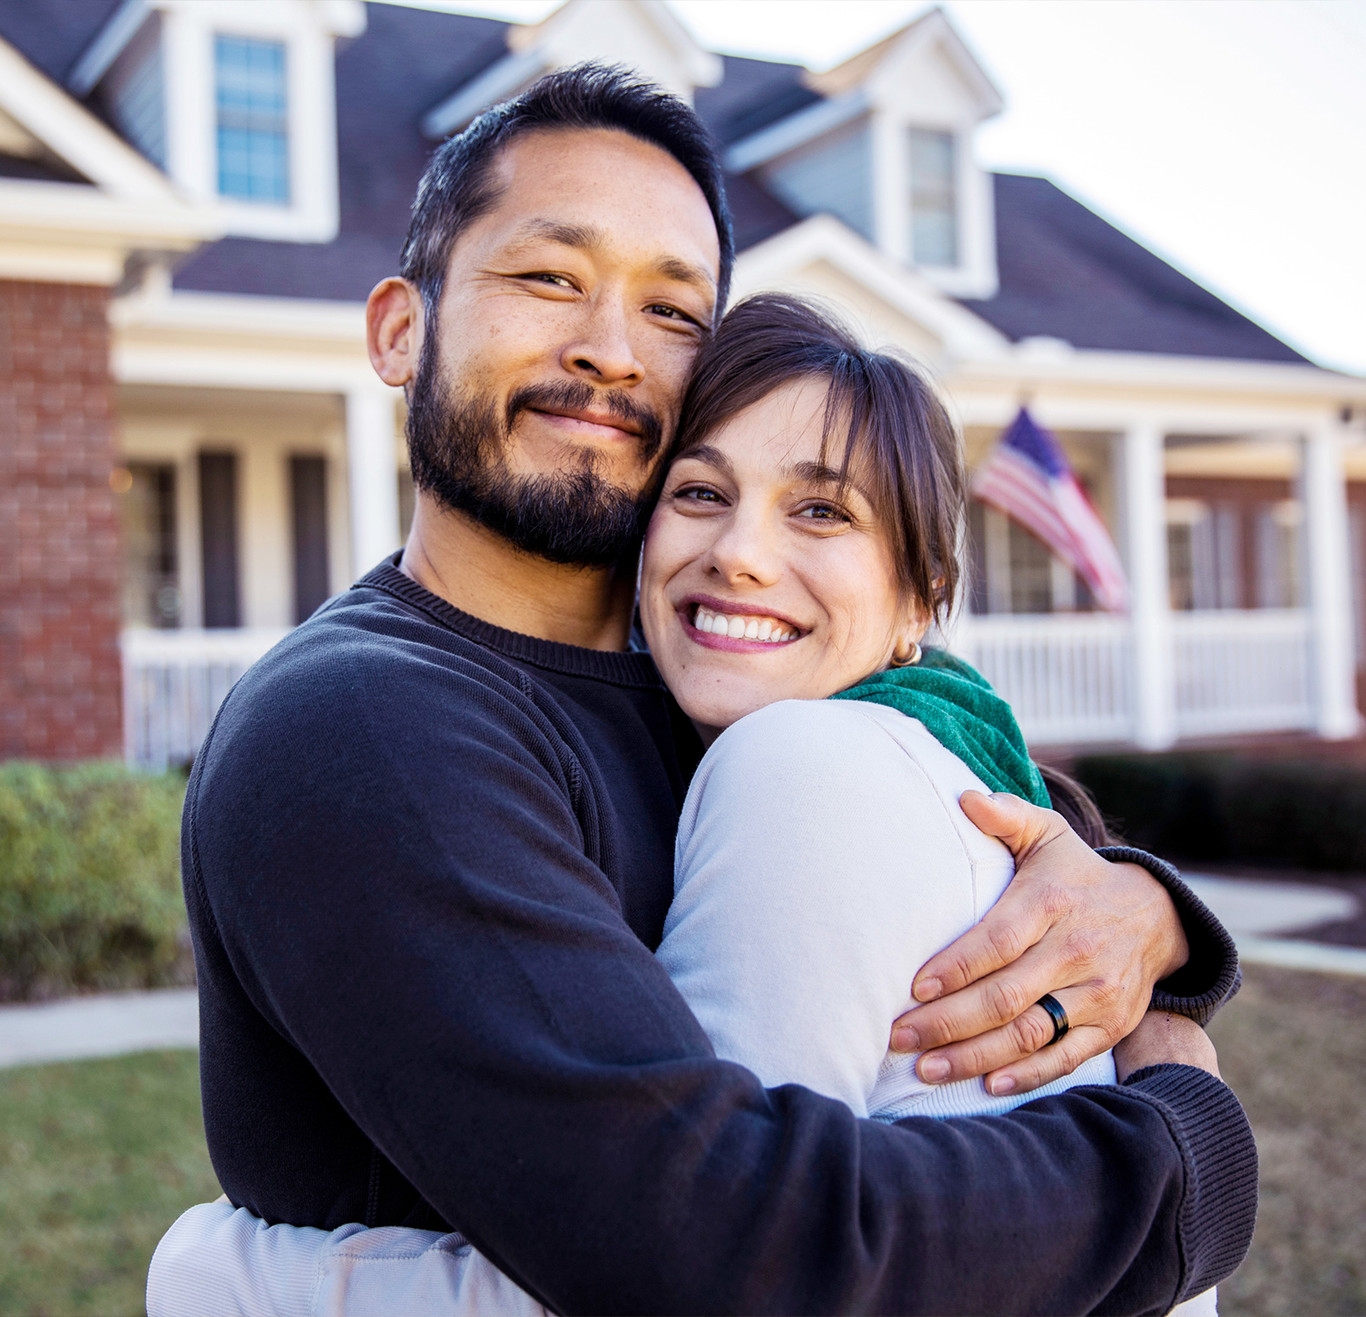 Man and Woman hugging in front of a house